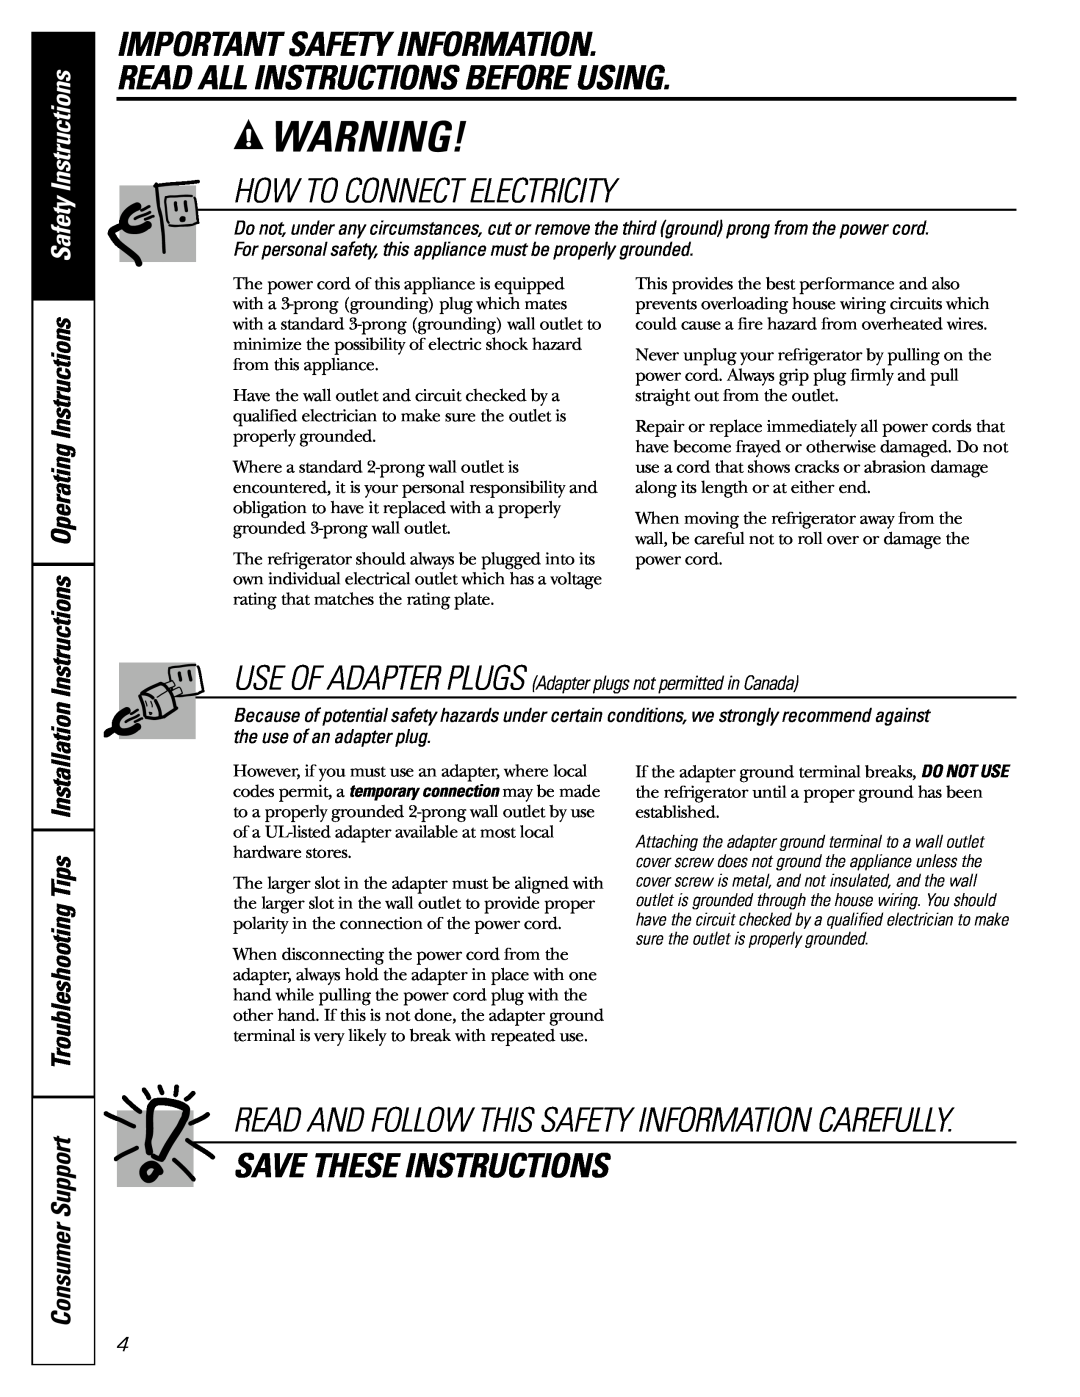 GE 197D4618P003 How To Connect Electricity, Save These Instructions, Troubleshooting Tips, Consumer Support 